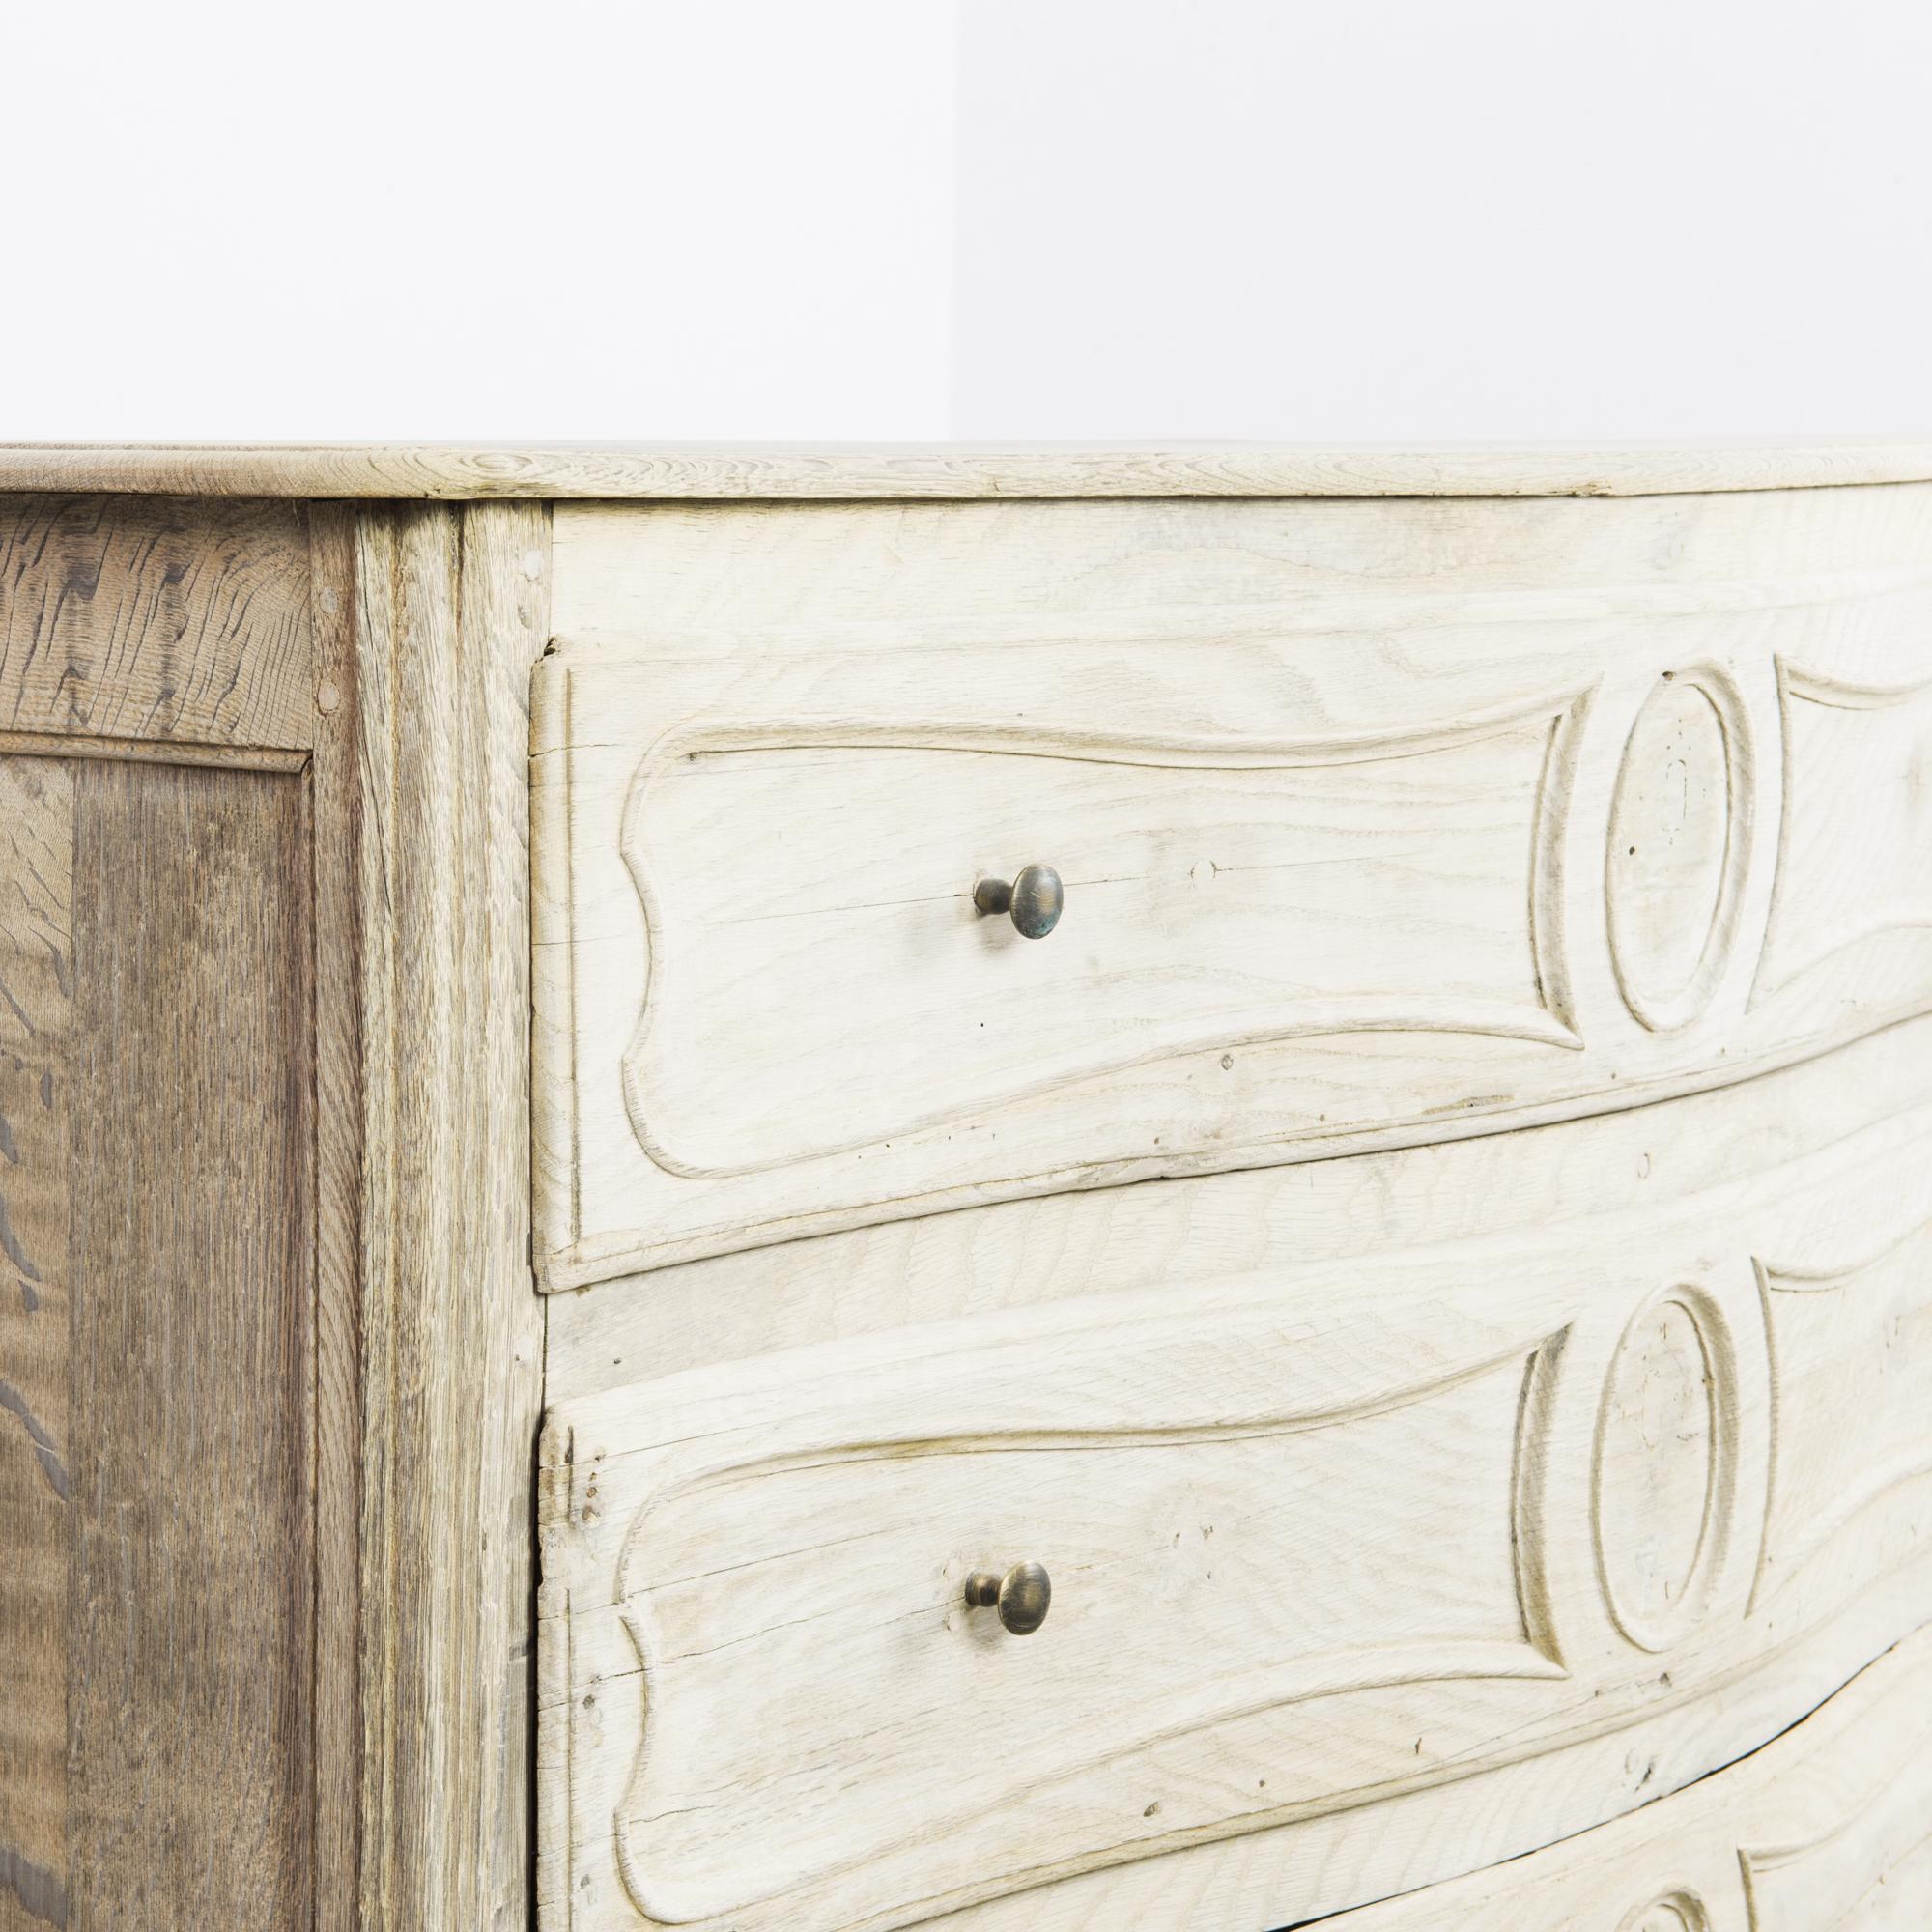 This bleached oak buffet with three drawers and lower shelves was made in France. The symmetrical features give it an understated elegance, complemented by the graceful curves of the scalloped apron and cabriole legs. Reeded sections on the front